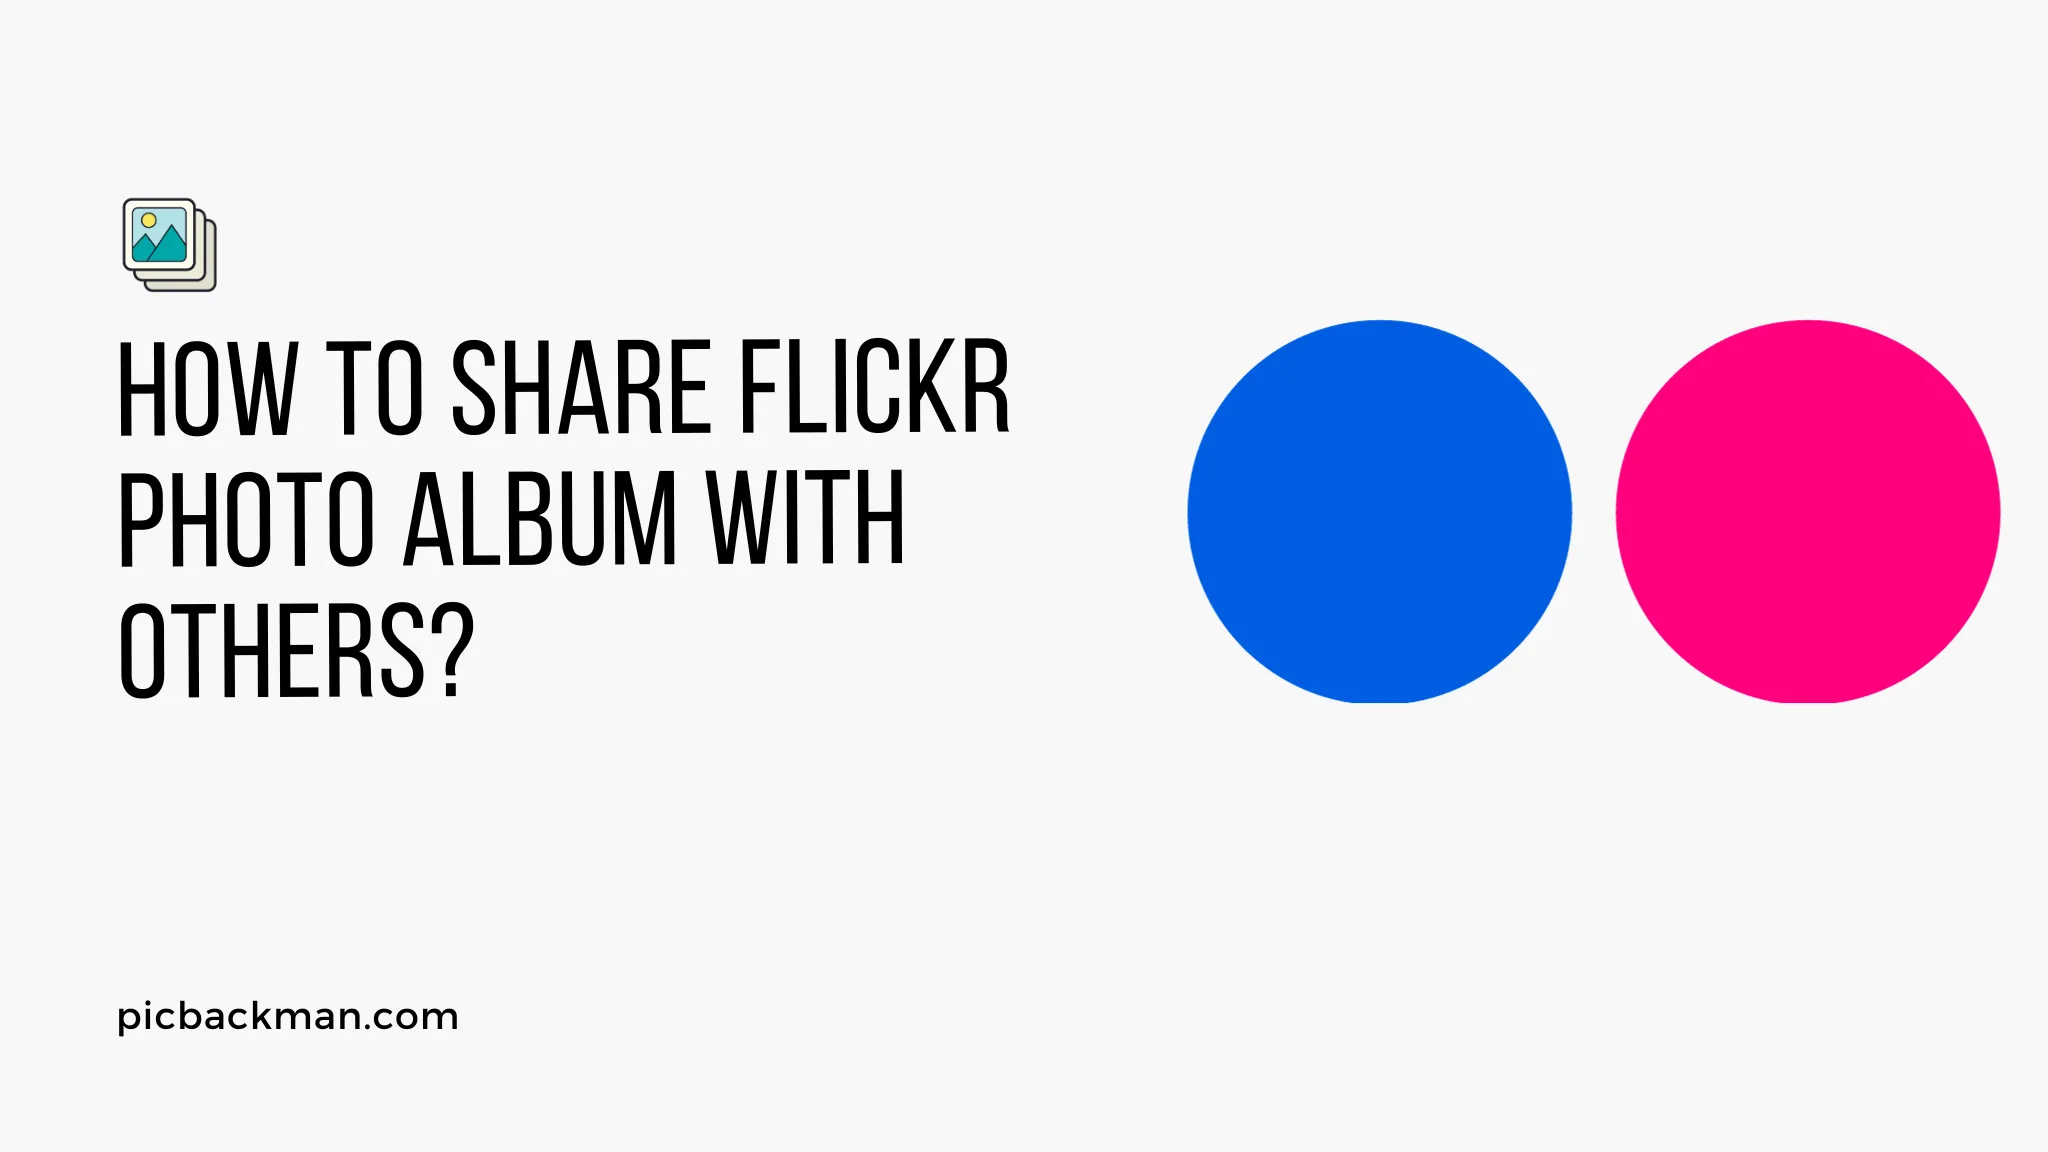 Flickr starts letting users login with Facebook